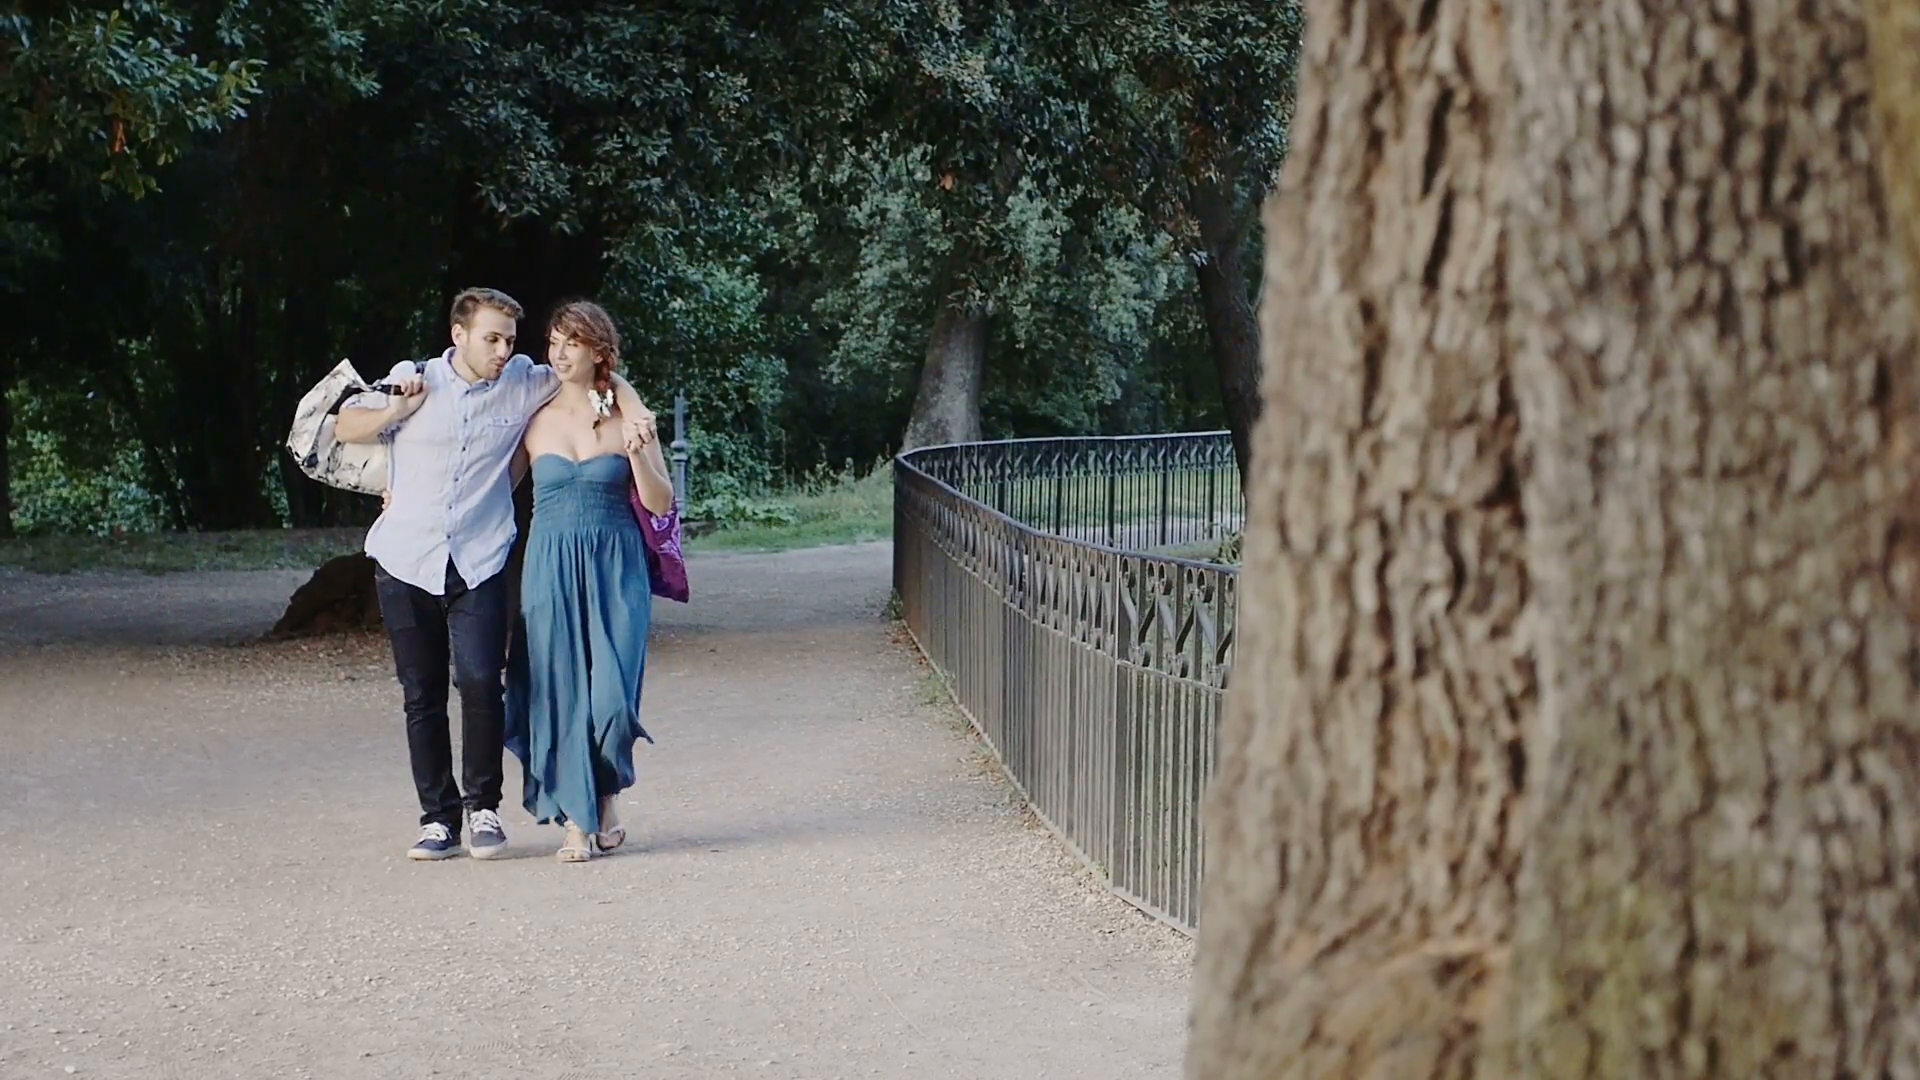 young lovers in the park after shopping: romantic walk in a park of ...